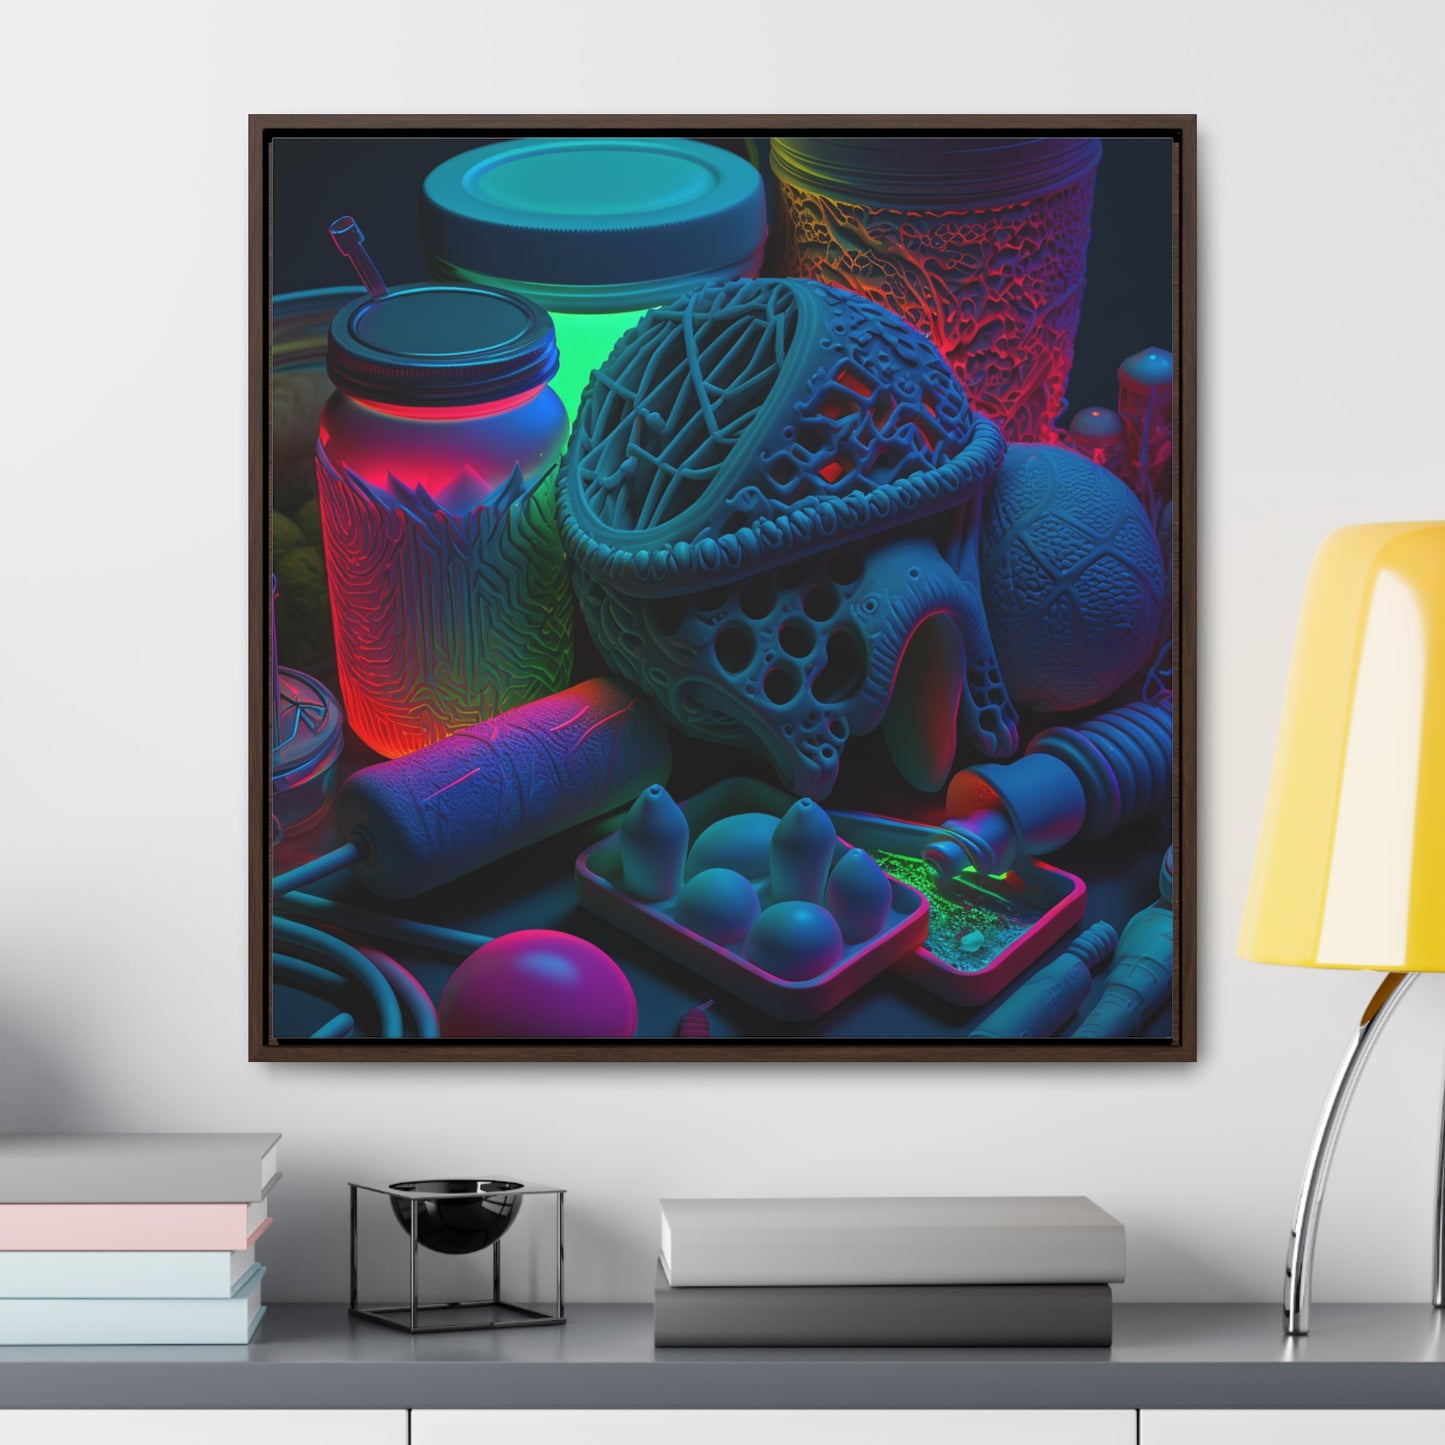 Gallery Canvas Wraps, Square Frame Neon Glow 1